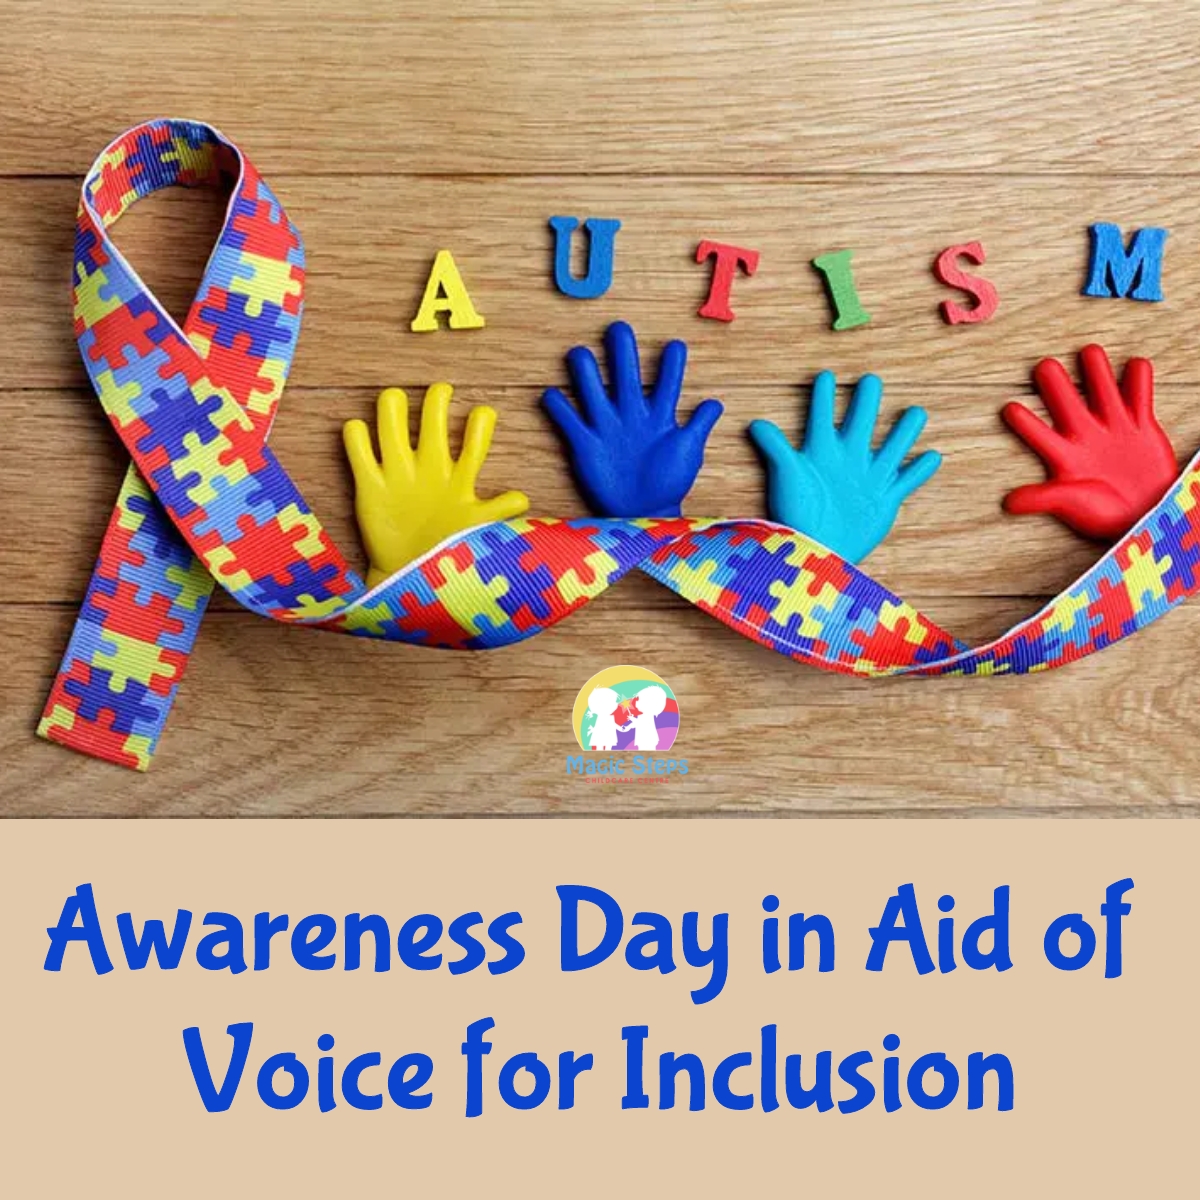 Autism Day in Aid of Voice for Inclusion- Monday 3rd April